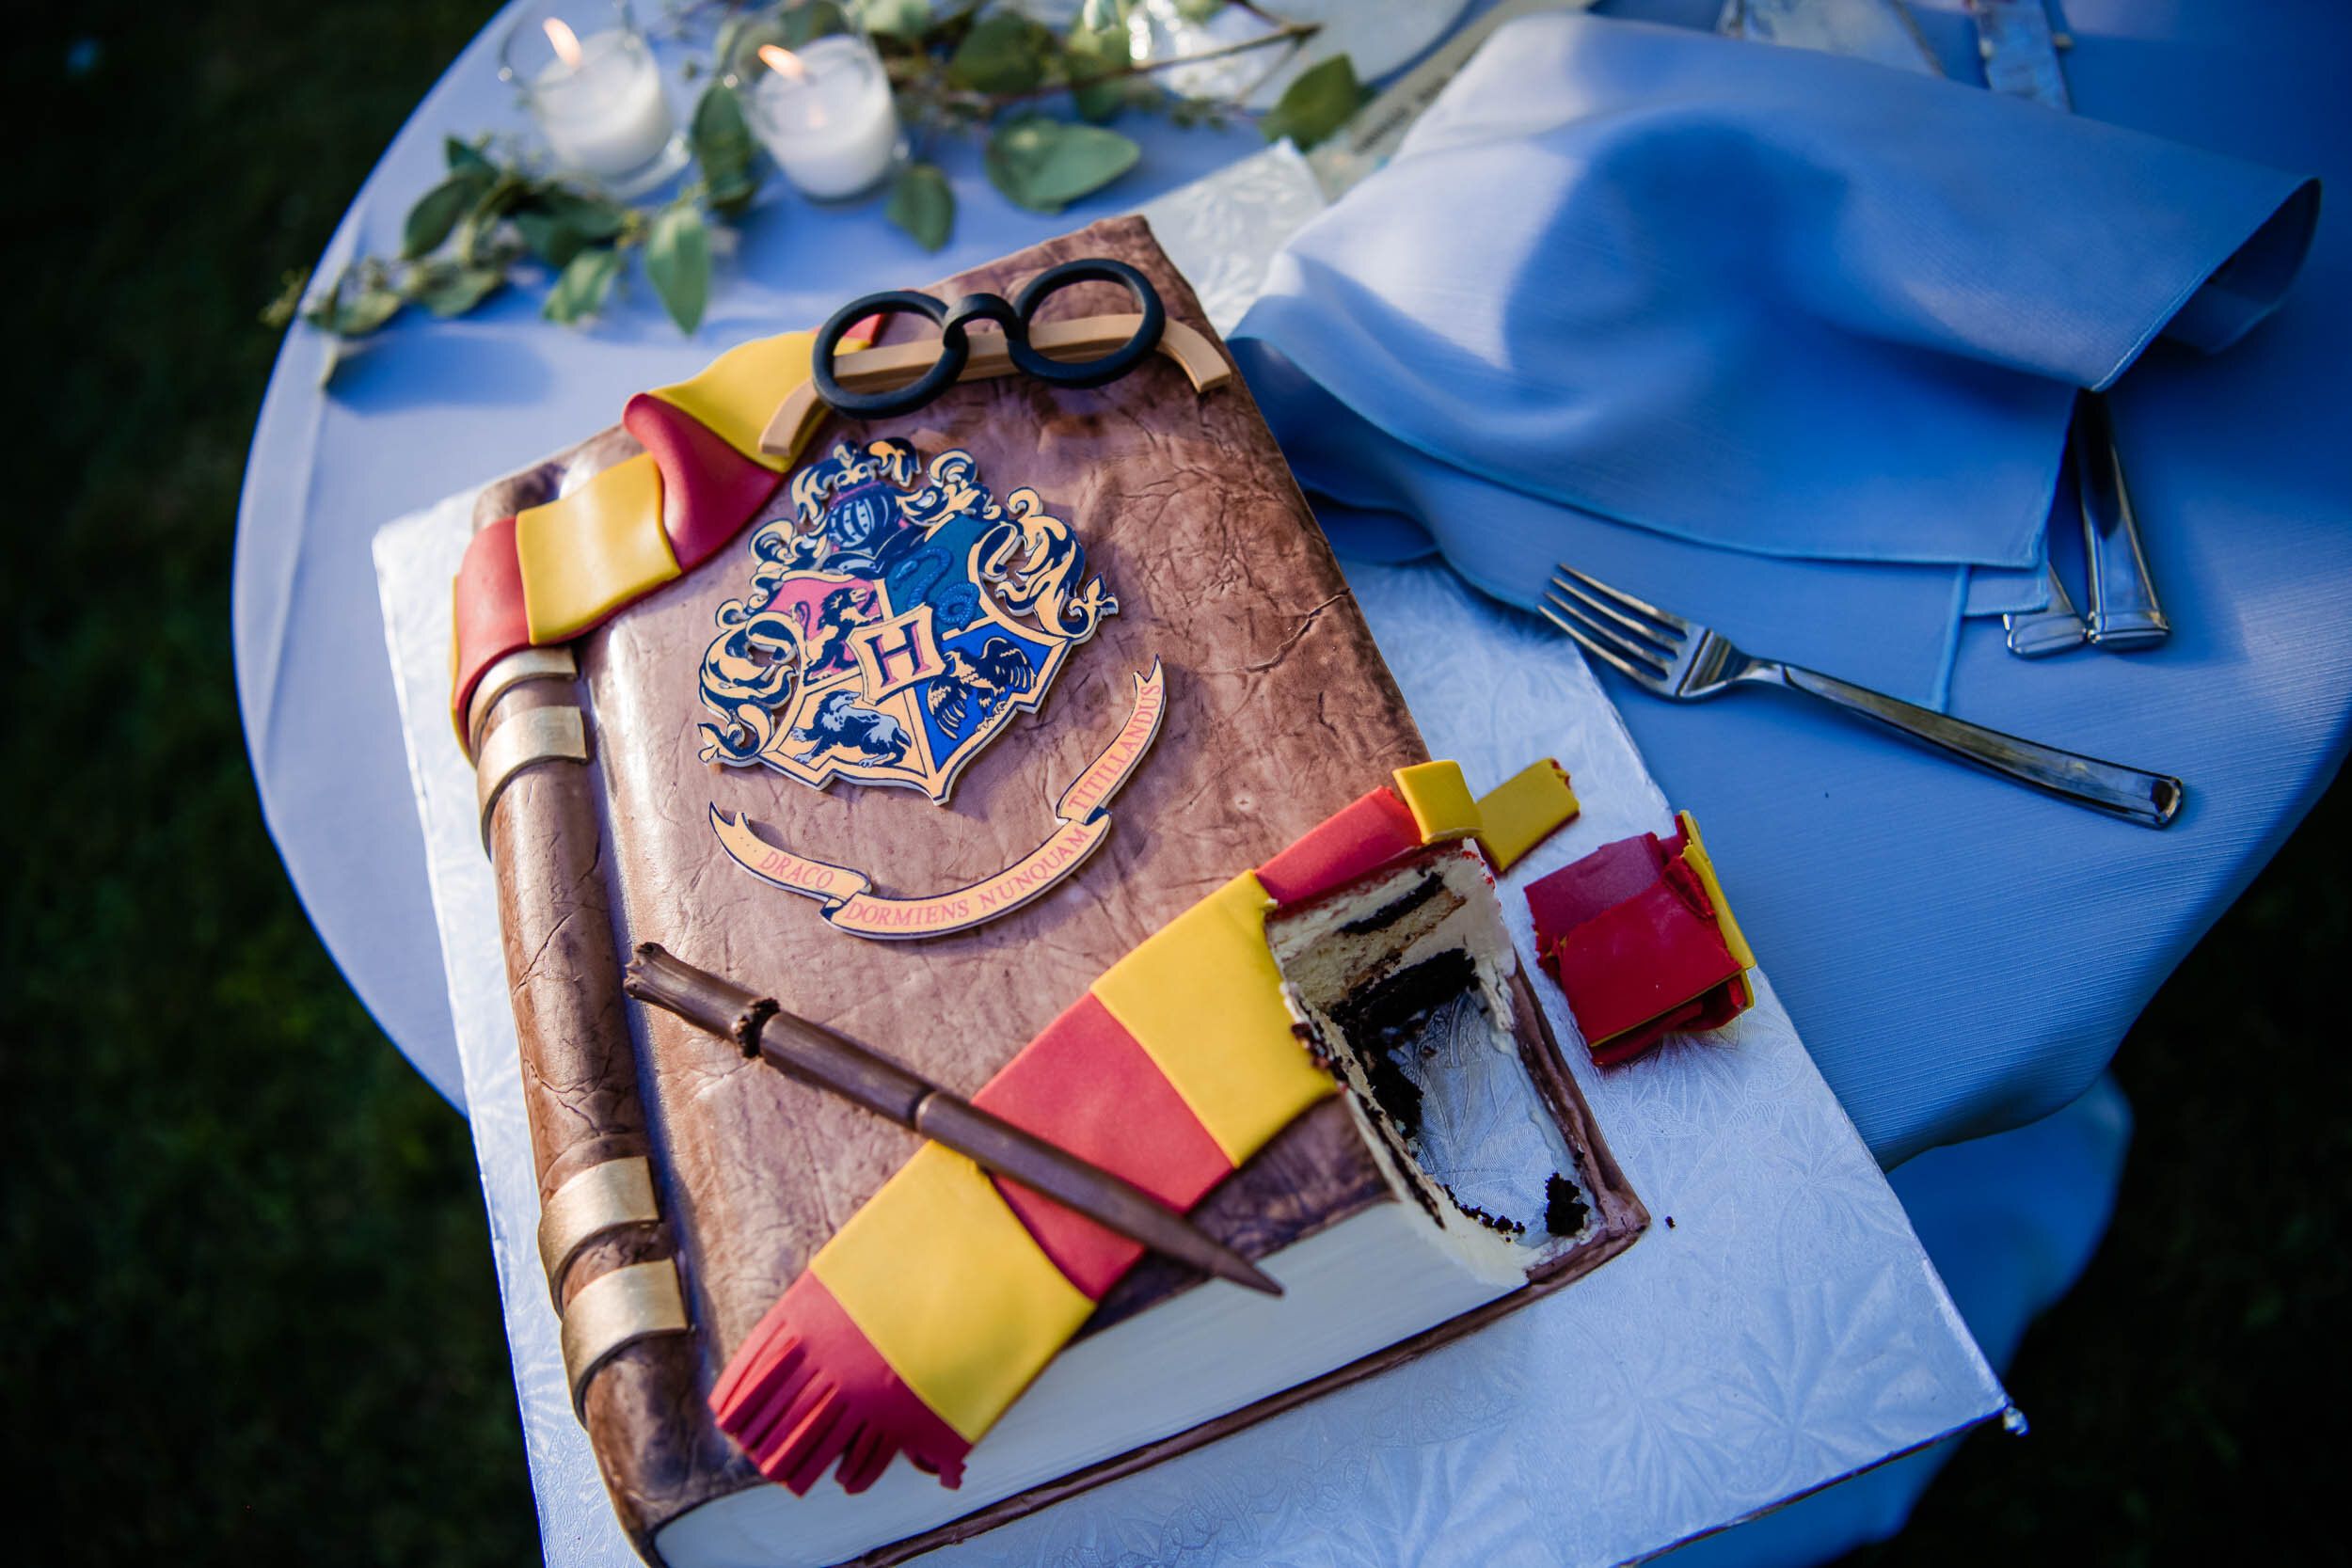 Harry Potter wedding cake at the reception:  Chicago backyard wedding photographed by J. Brown Photography.